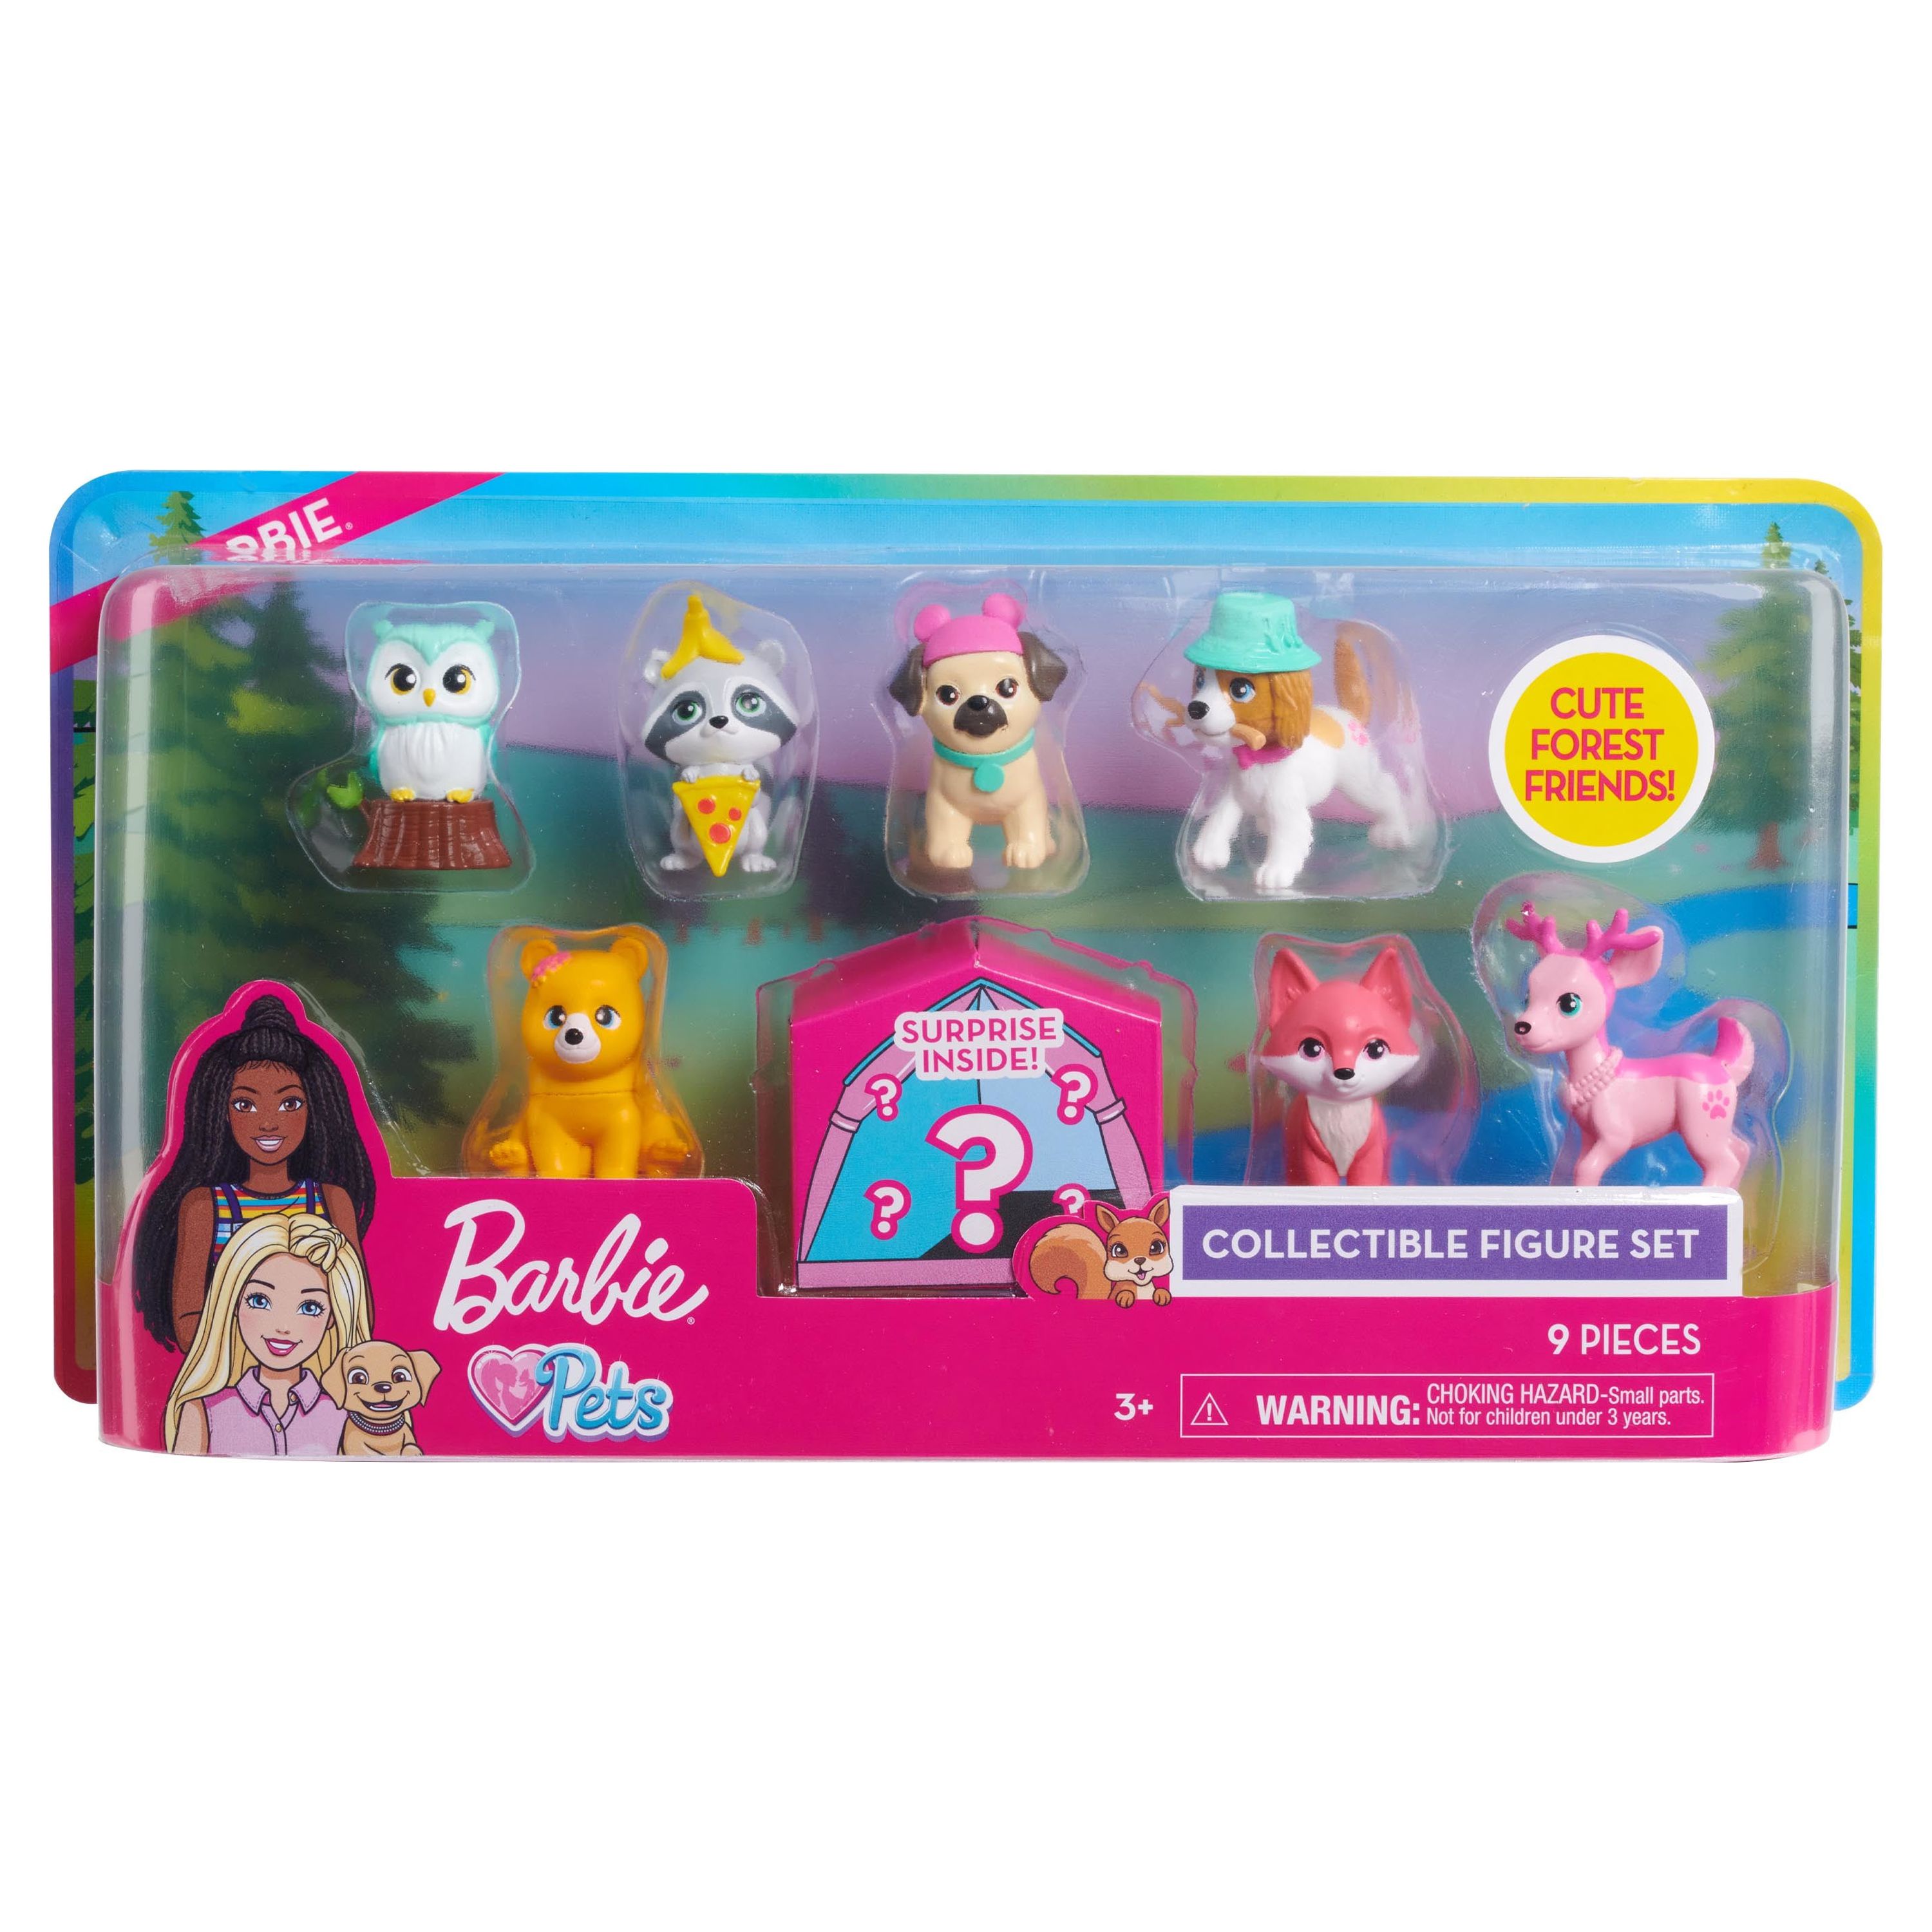 Barbie 7 Pack Figure Collector Set,  Kids Toys for Ages 3 Up, Gifts and Presents - image 5 of 5